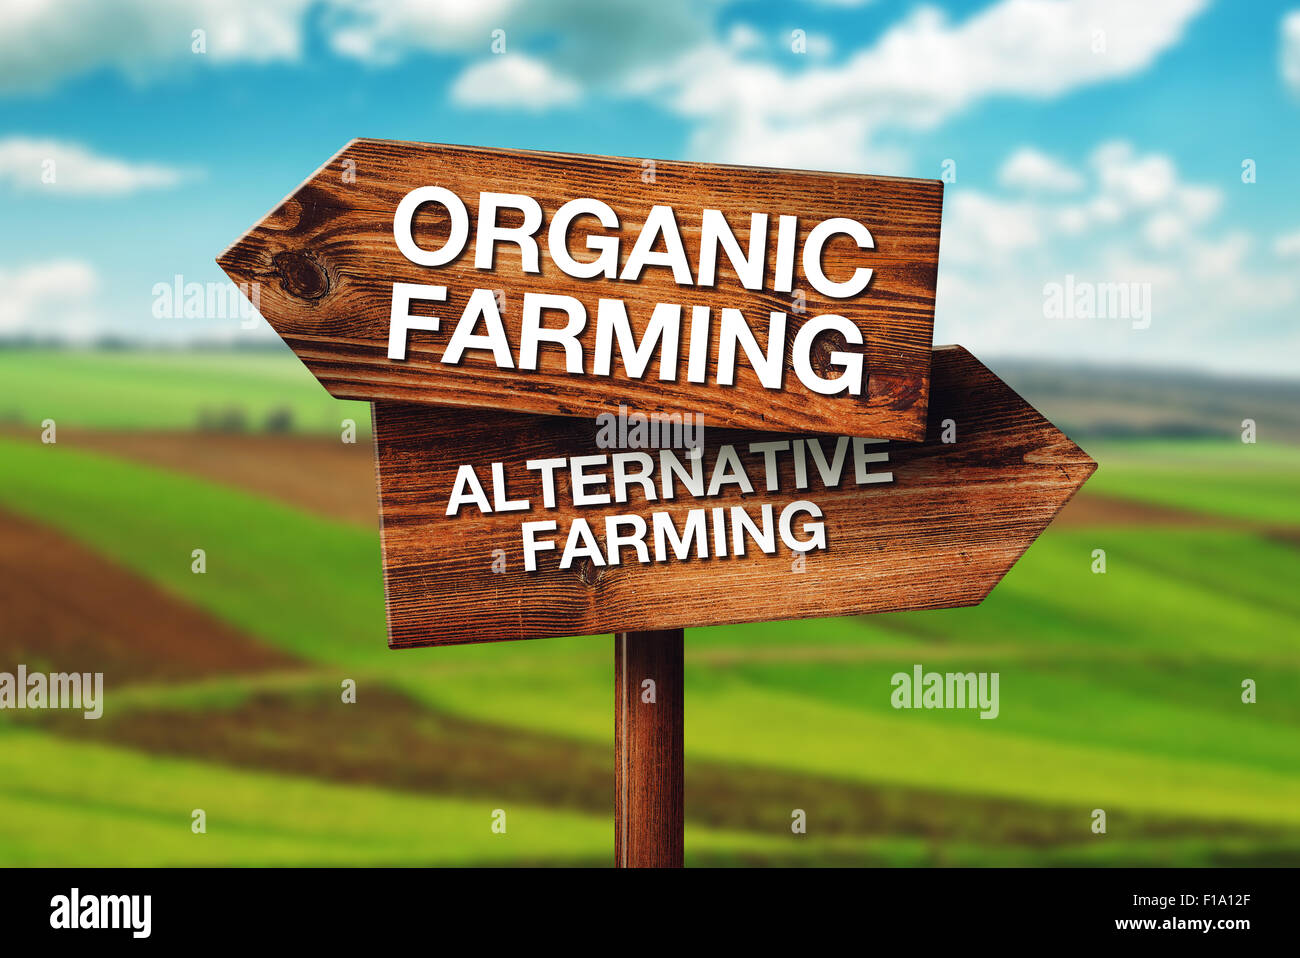 Organic or Alternative Farming, Concept of Choice in Agricultural Production, Arable Cultivated Land in Background Stock Photo